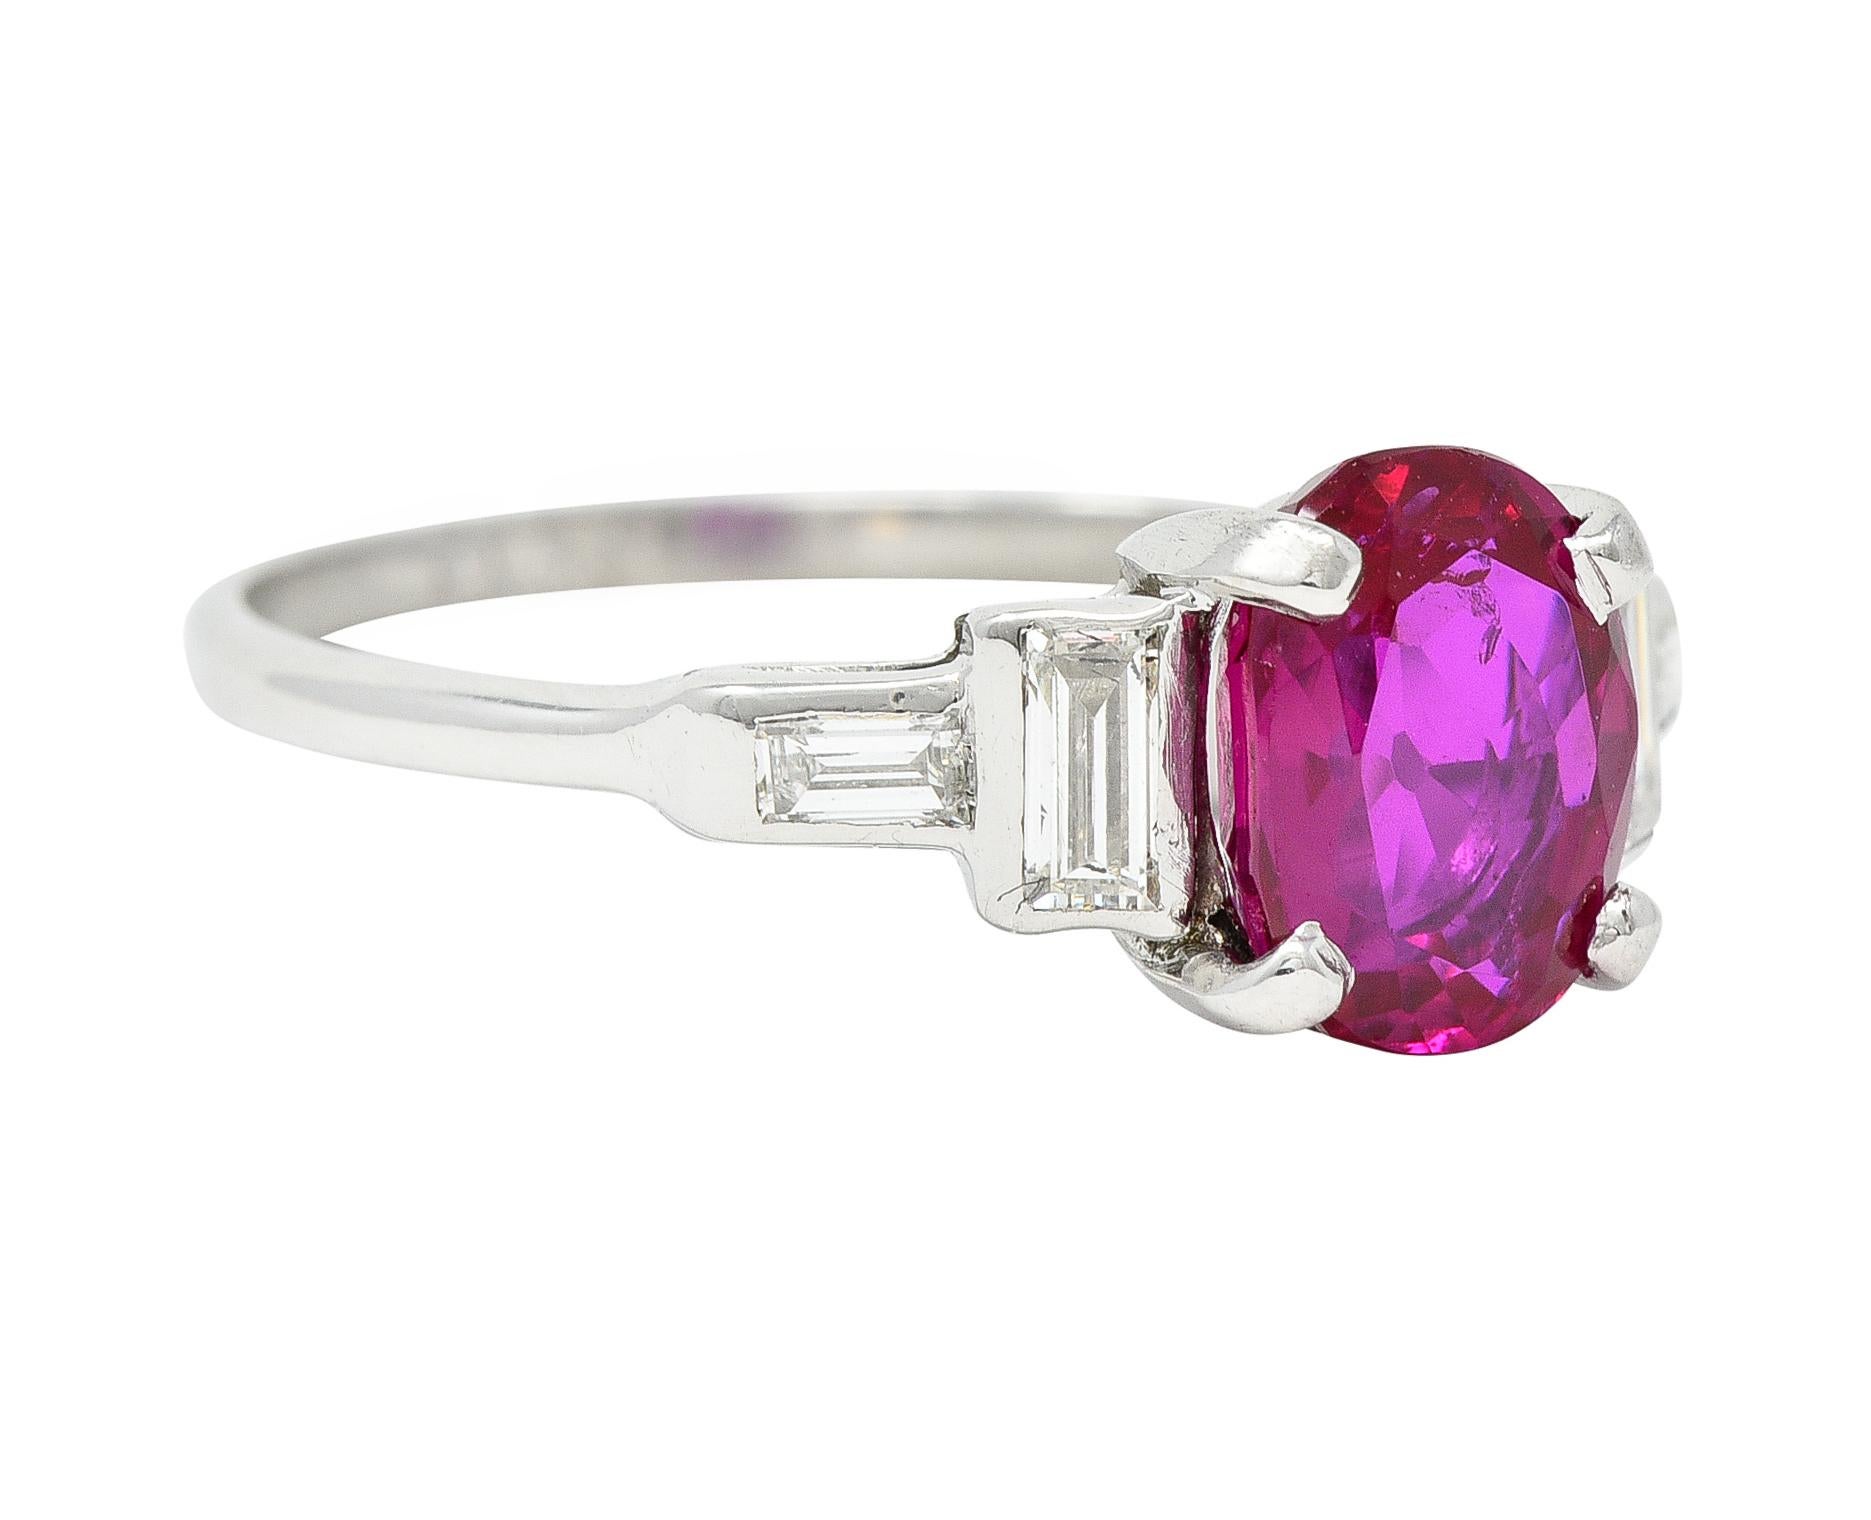 Centering a cushion cut ruby weighing 1.64 carats - medium purplish-red in color 
Natural Burmese in origin with no indications of heat treatment 
Prong set in basket and flanked by stepped shoulders
Bezel set with baguette-cut diamonds 
Weighing